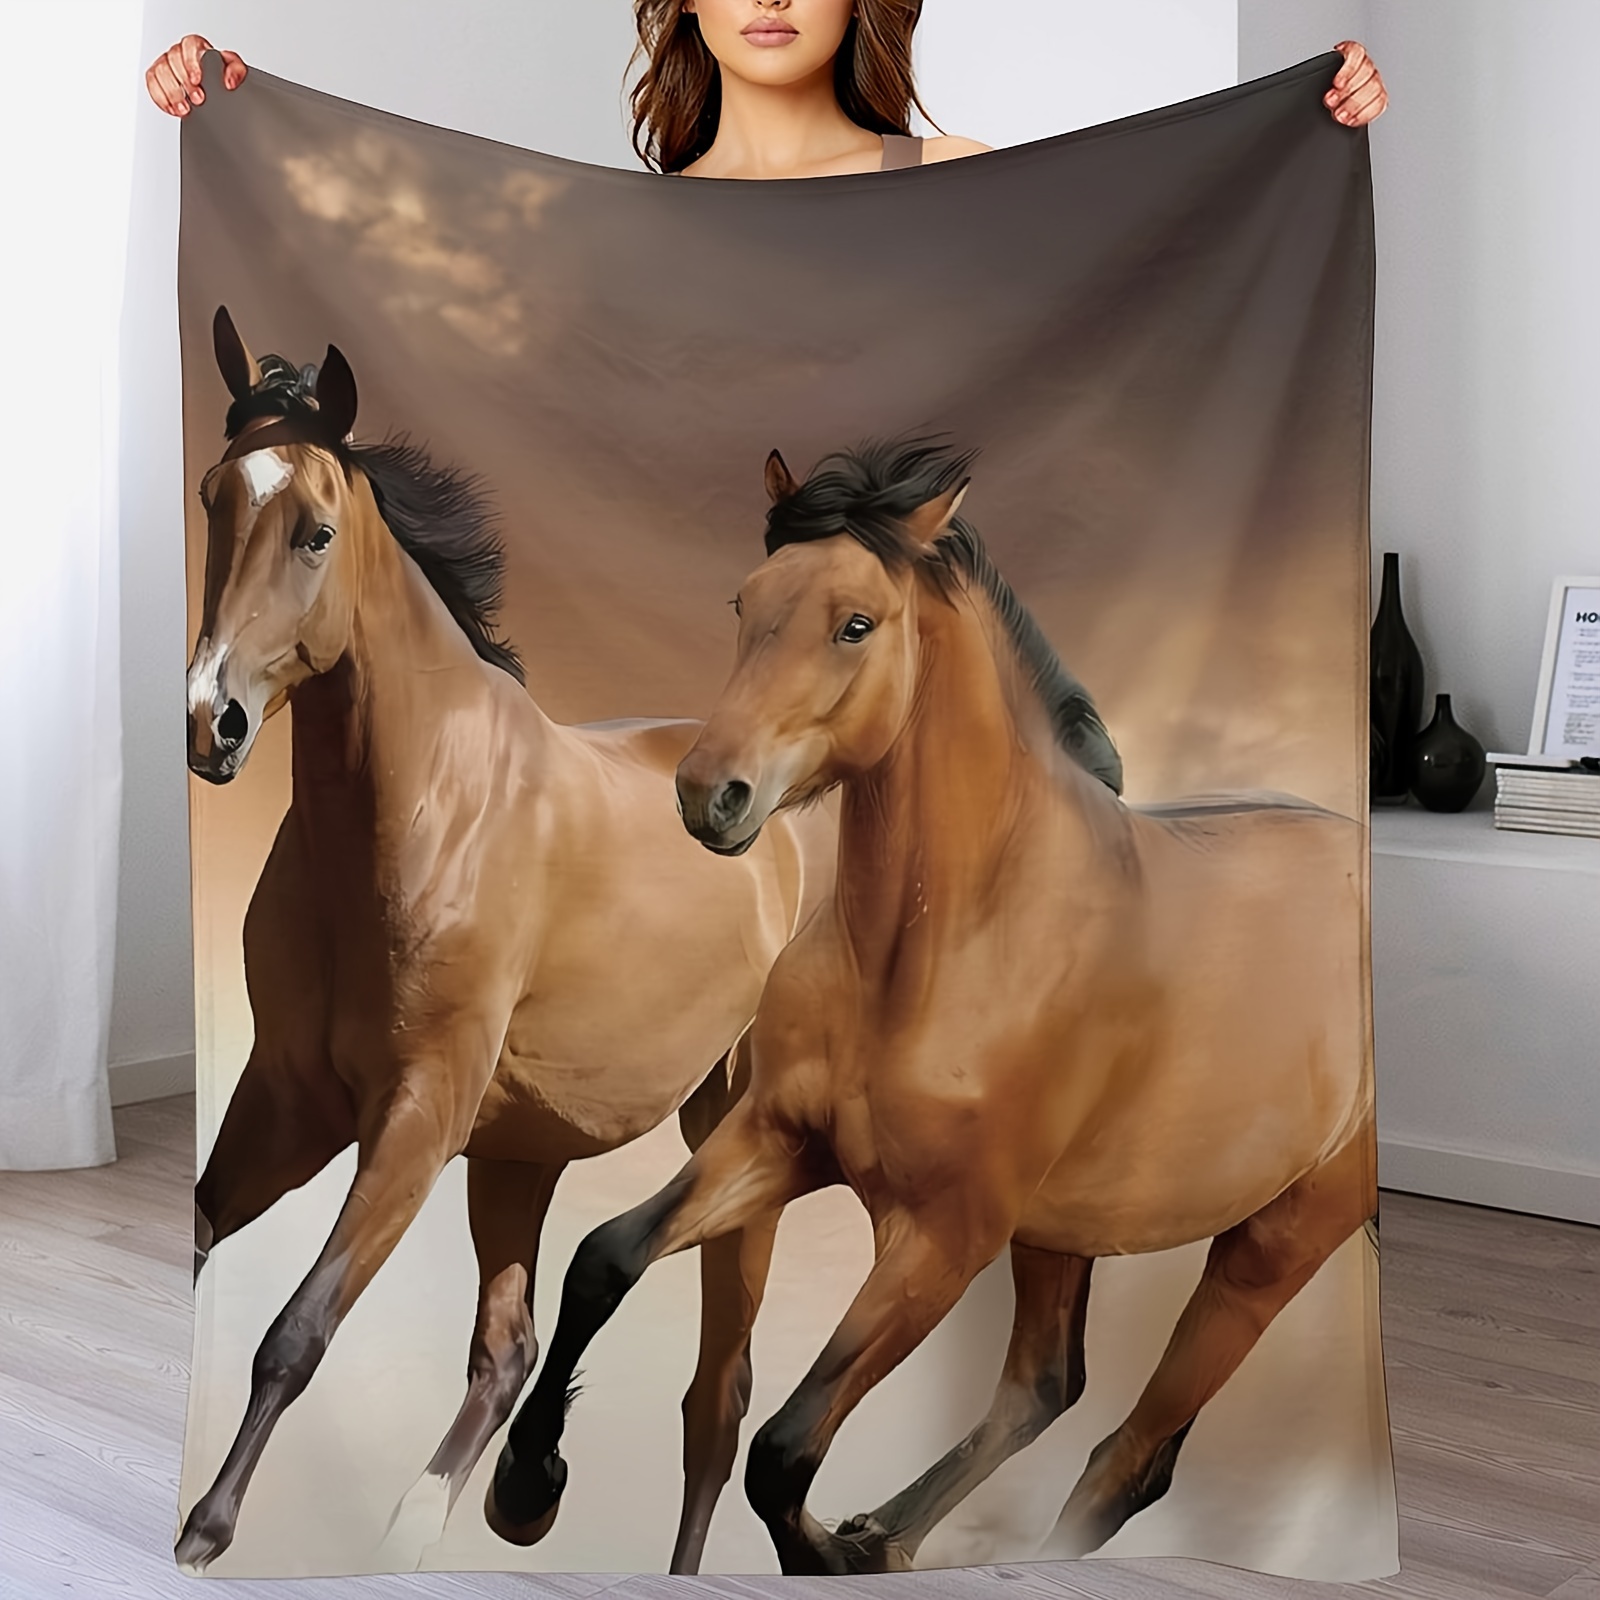 

Galloping Horse Blanket Gifts For Men Women Boys Decor For Home Bedroom Living Room Chair Sofa, Soft Cozy Smooth Lightweight Throw Plush Blankets Brown